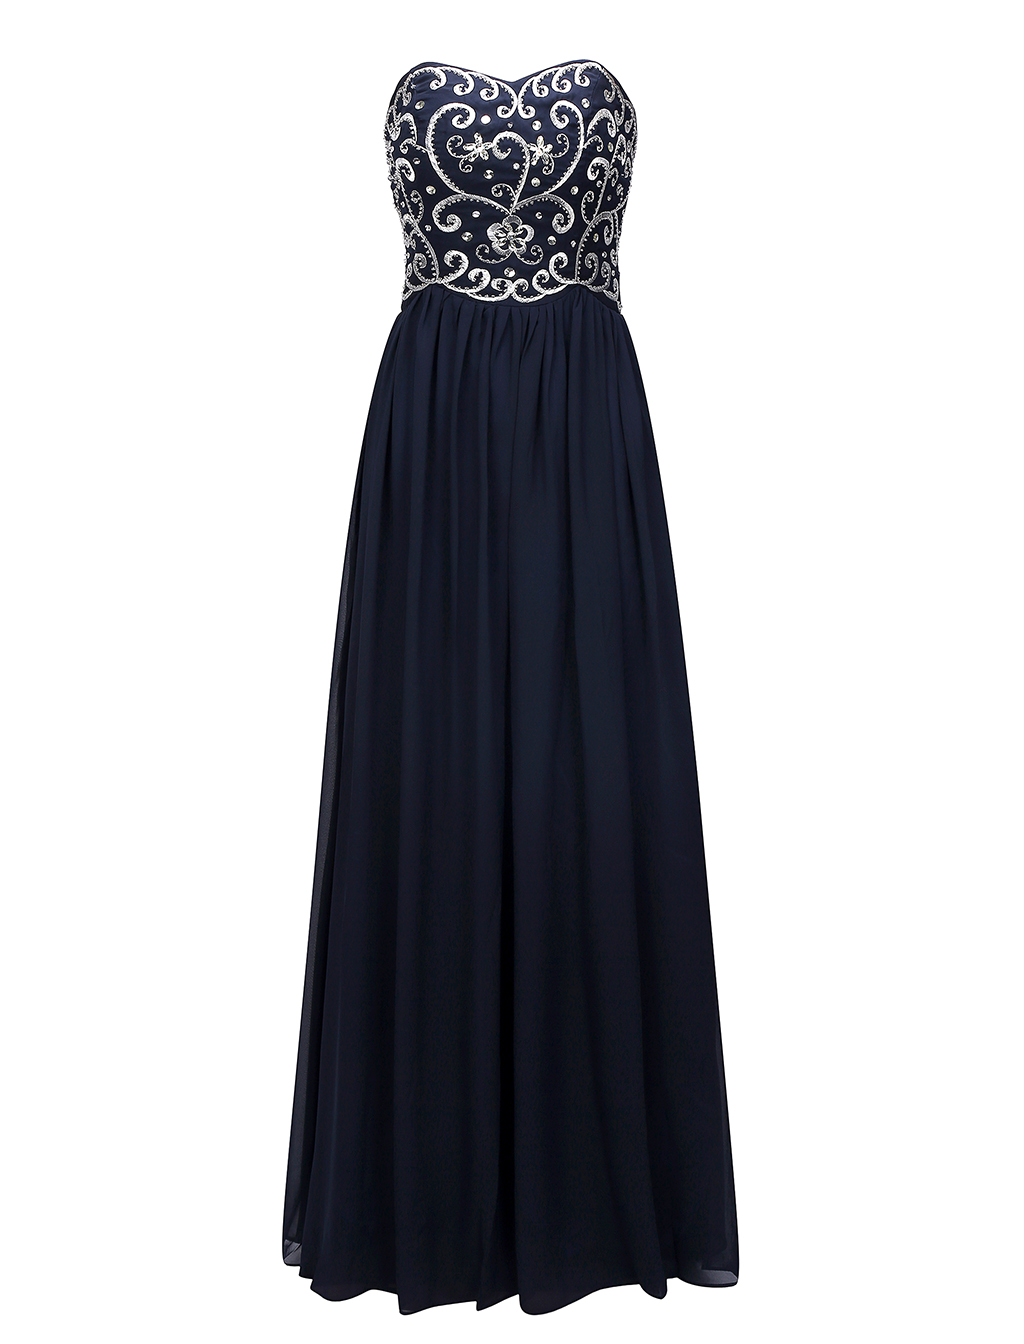 Embroidery Navy Blue Chiffon Prom Dress Strapless Beaded Long Formal Dress